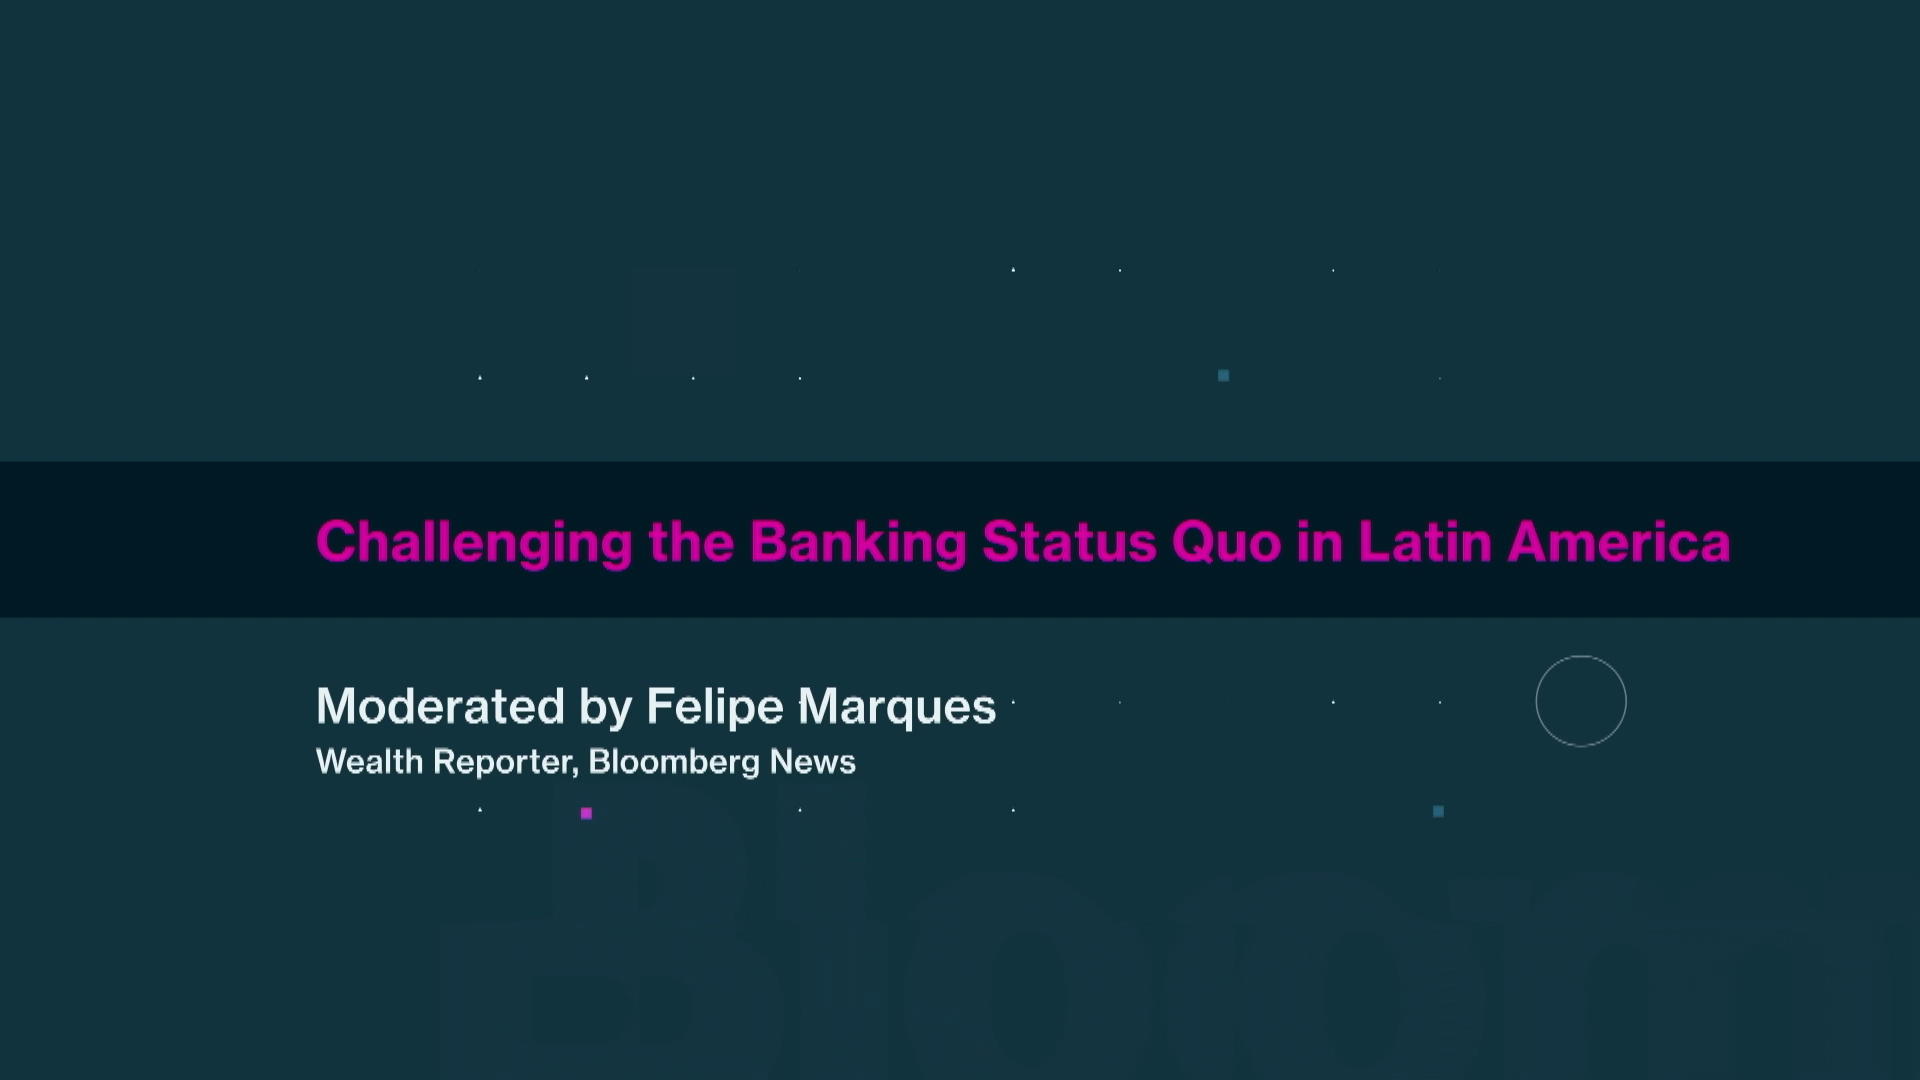 Challenging the Banking Status Quo in Latin America